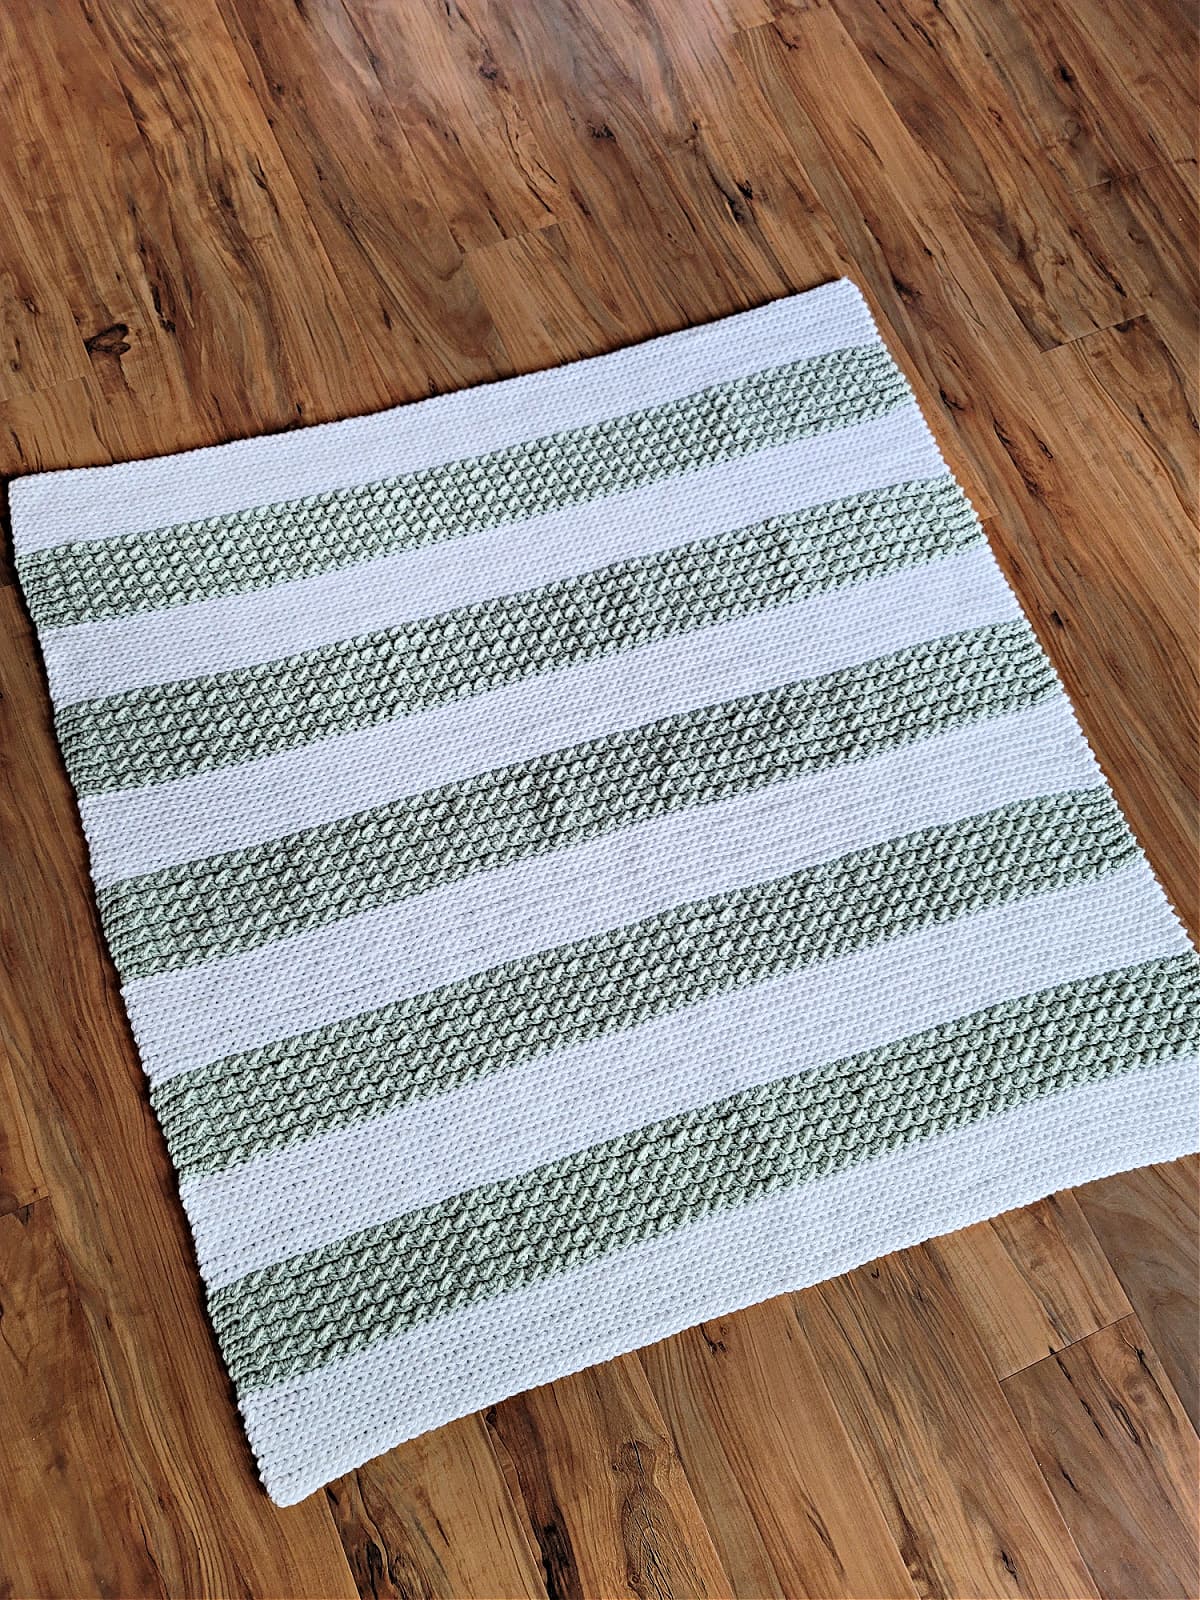 Crochet baby blanket pattern in white and greed wide stripes laid on wood floor.